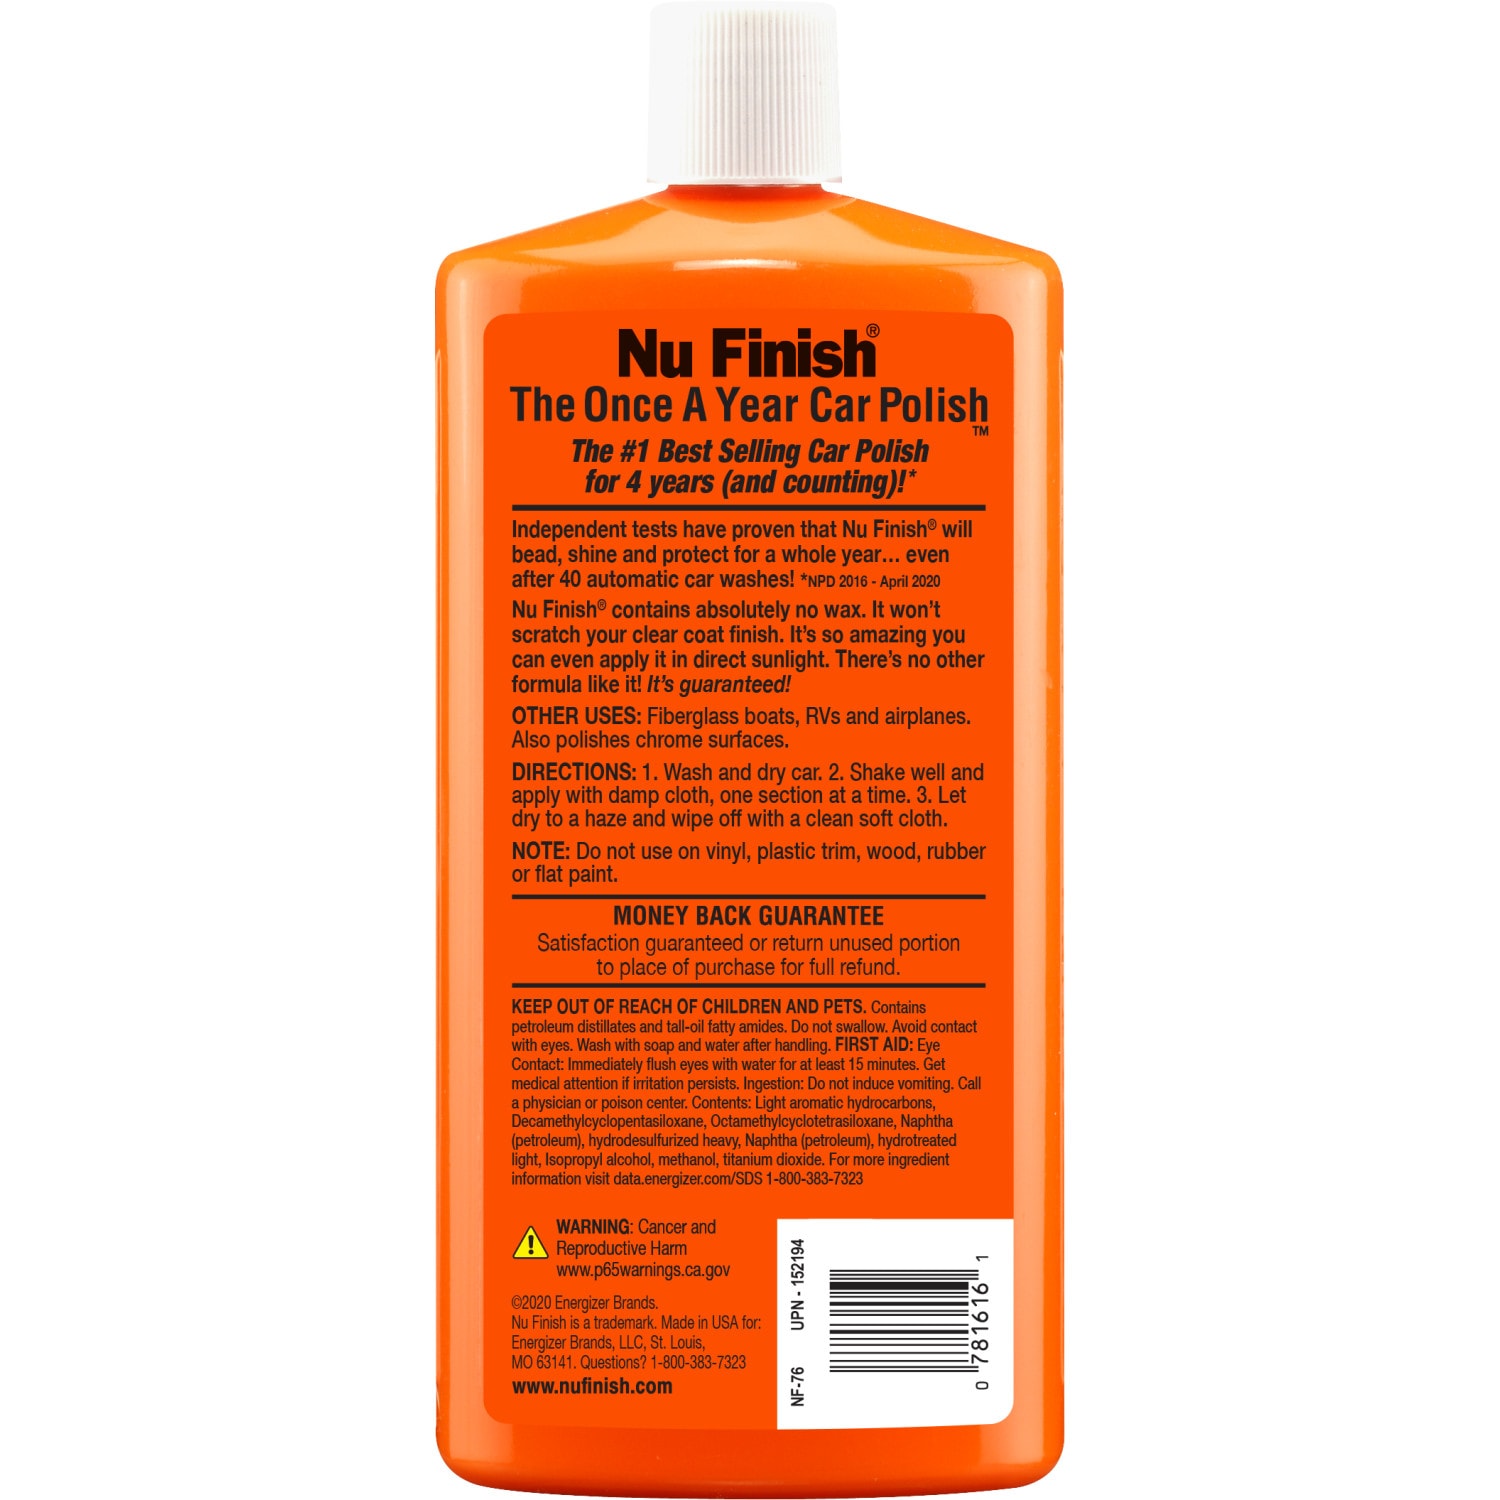 Nu Finish Car Polish, #DidYouKnow Our Car Polish is rated #1 for  protection, durability, gloss improvement and best retail value? What's  your detailing tip of the day?, By Nu Finish